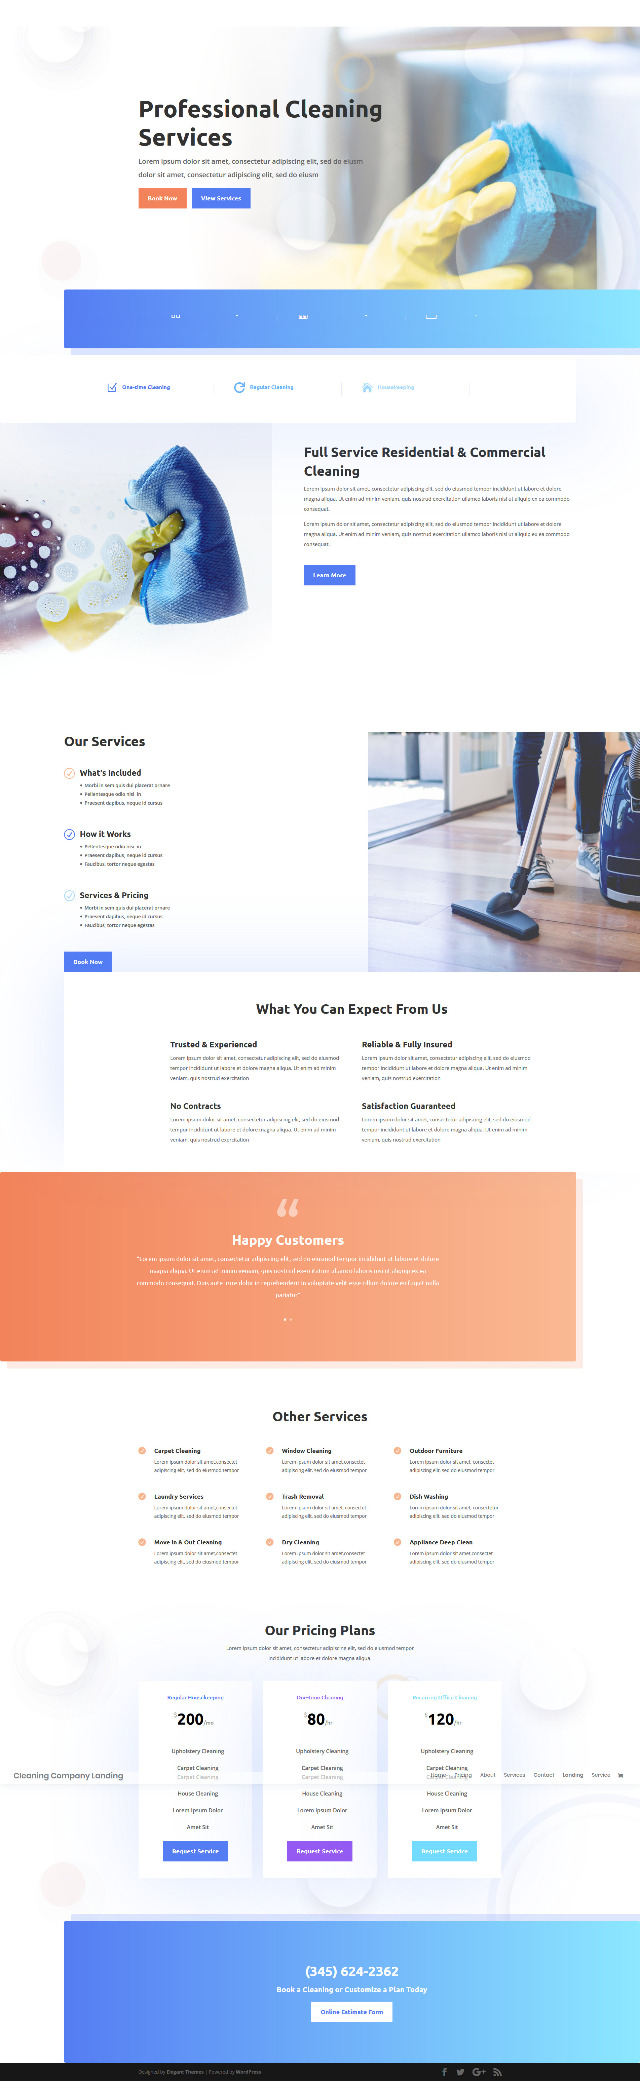 FREE Cleaning Company Layout Pack 免費清潔公司範例頁面組合下載